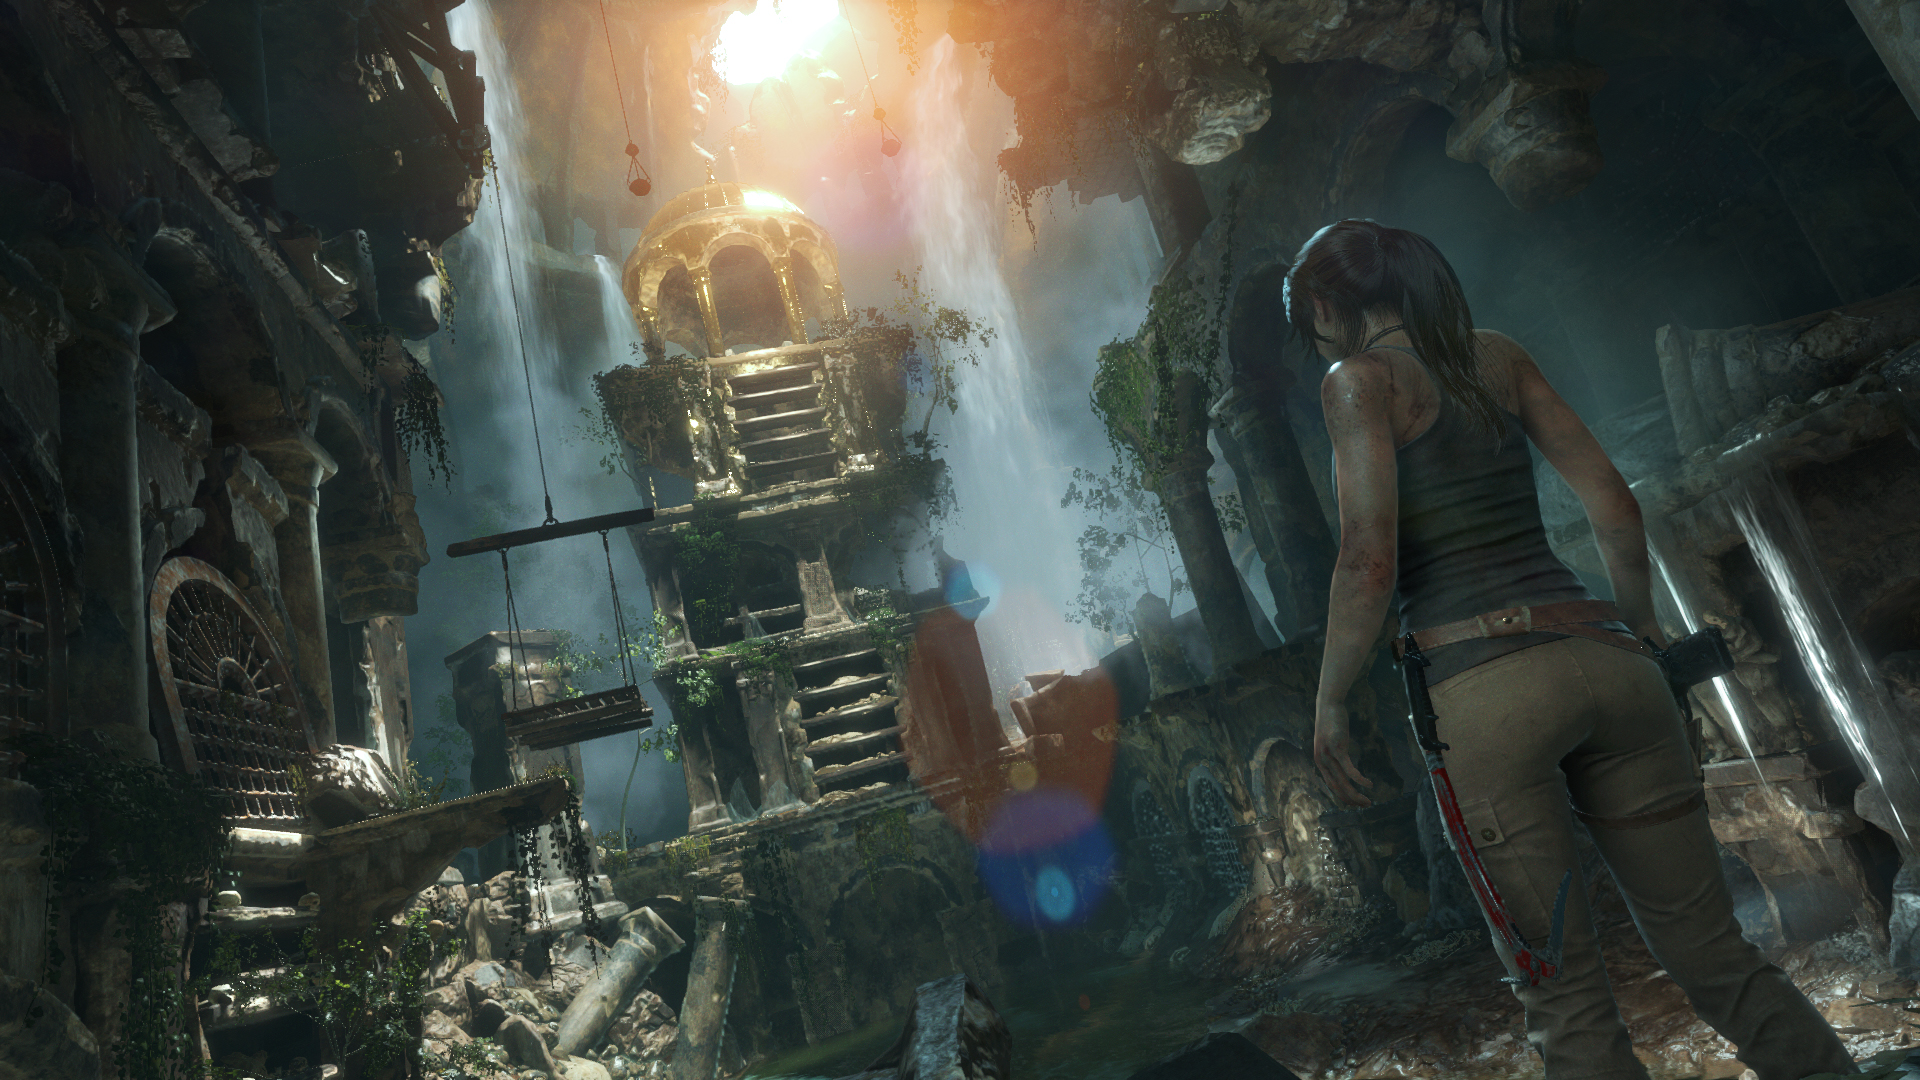 Media asset in full size related to 3dfxzone.it news item entitled as follows: Rise of the Tomb Raider non includer la versione multiplayer | Image Name: news23033_Rise-of-the-Tomb-Raider-Screenshot_5.jpg